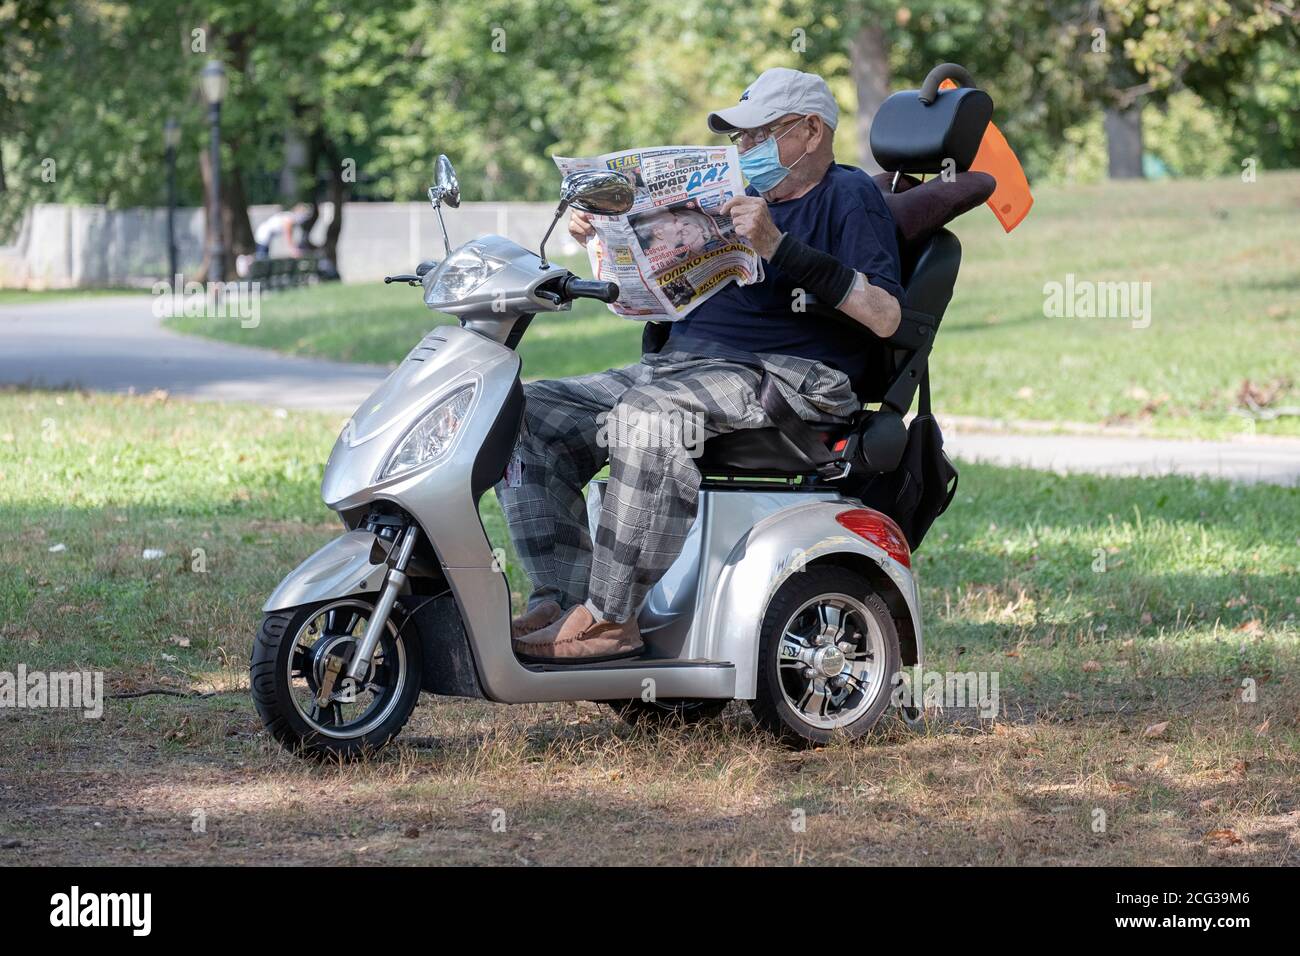 An older man wearing a mask over his mouth reads a foregn language newspaper on his 3 wheeled motor scooter in a snady spot in a park. In Queens, NYC. Stock Photo